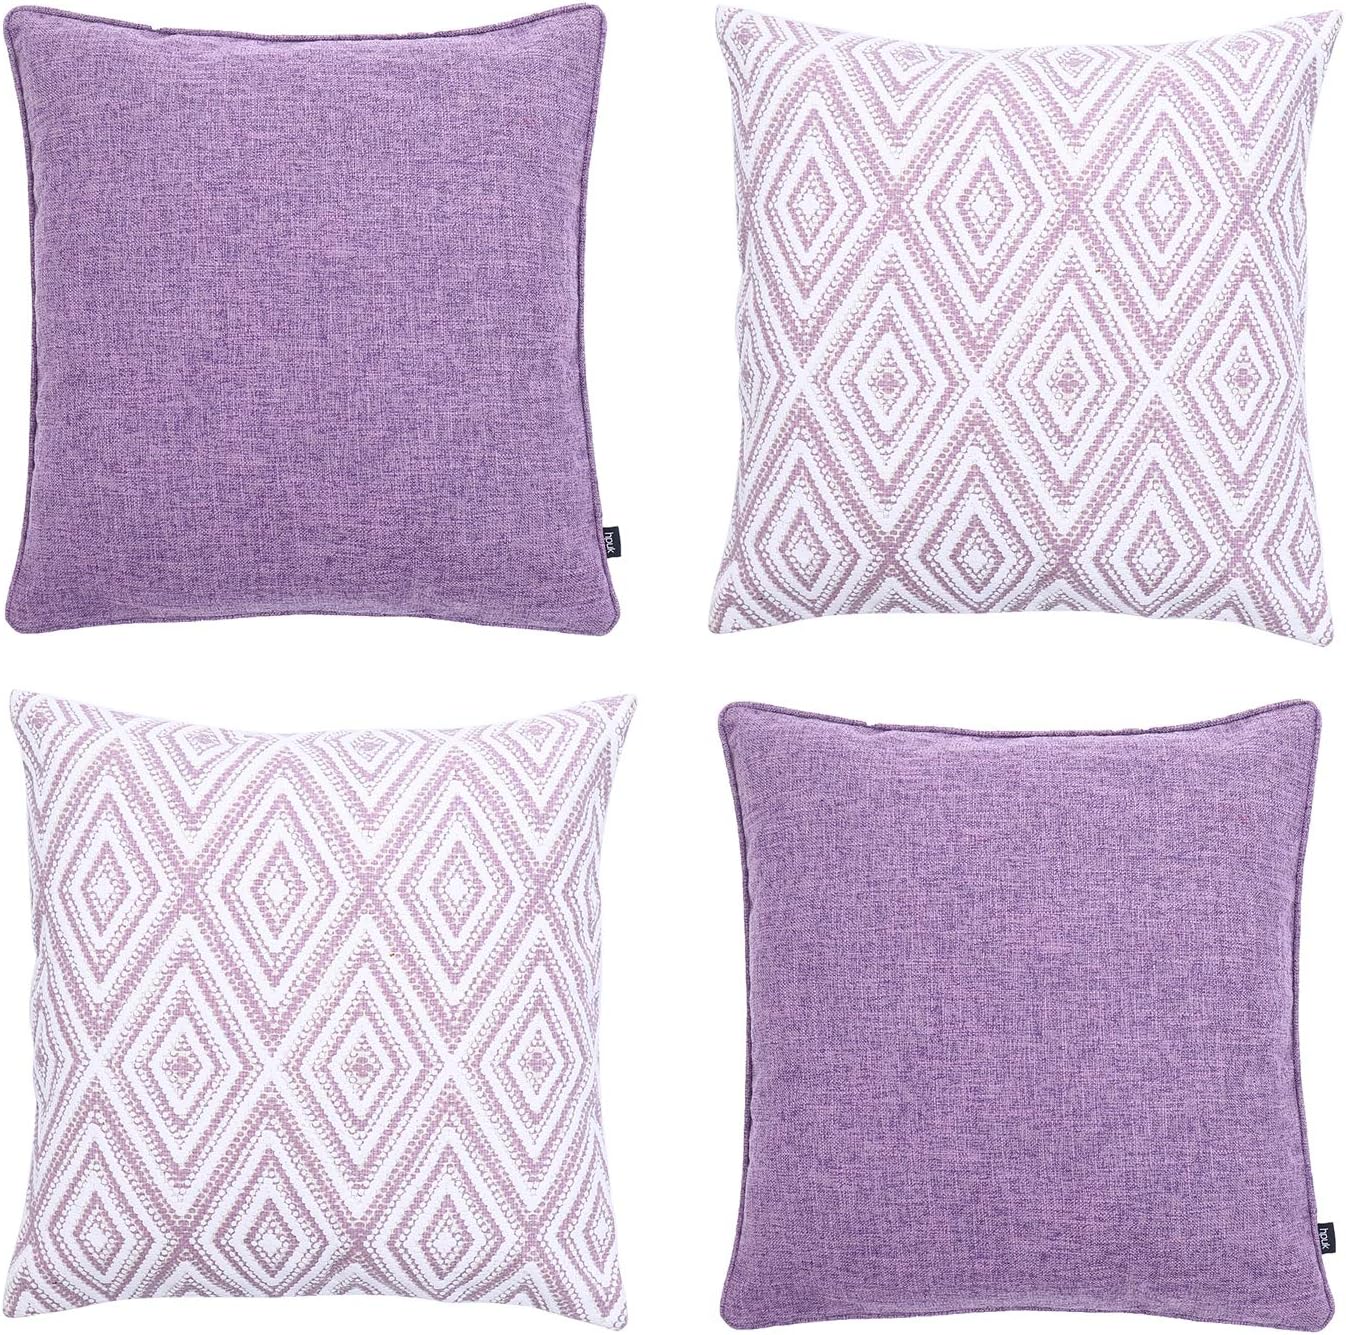 HPUK Decorative Throw Pillow Covers Set of 4 Geometric Design Linen Cushion Cover for Couch Sofa Living Room, 18x18 inches, Lavender Mist